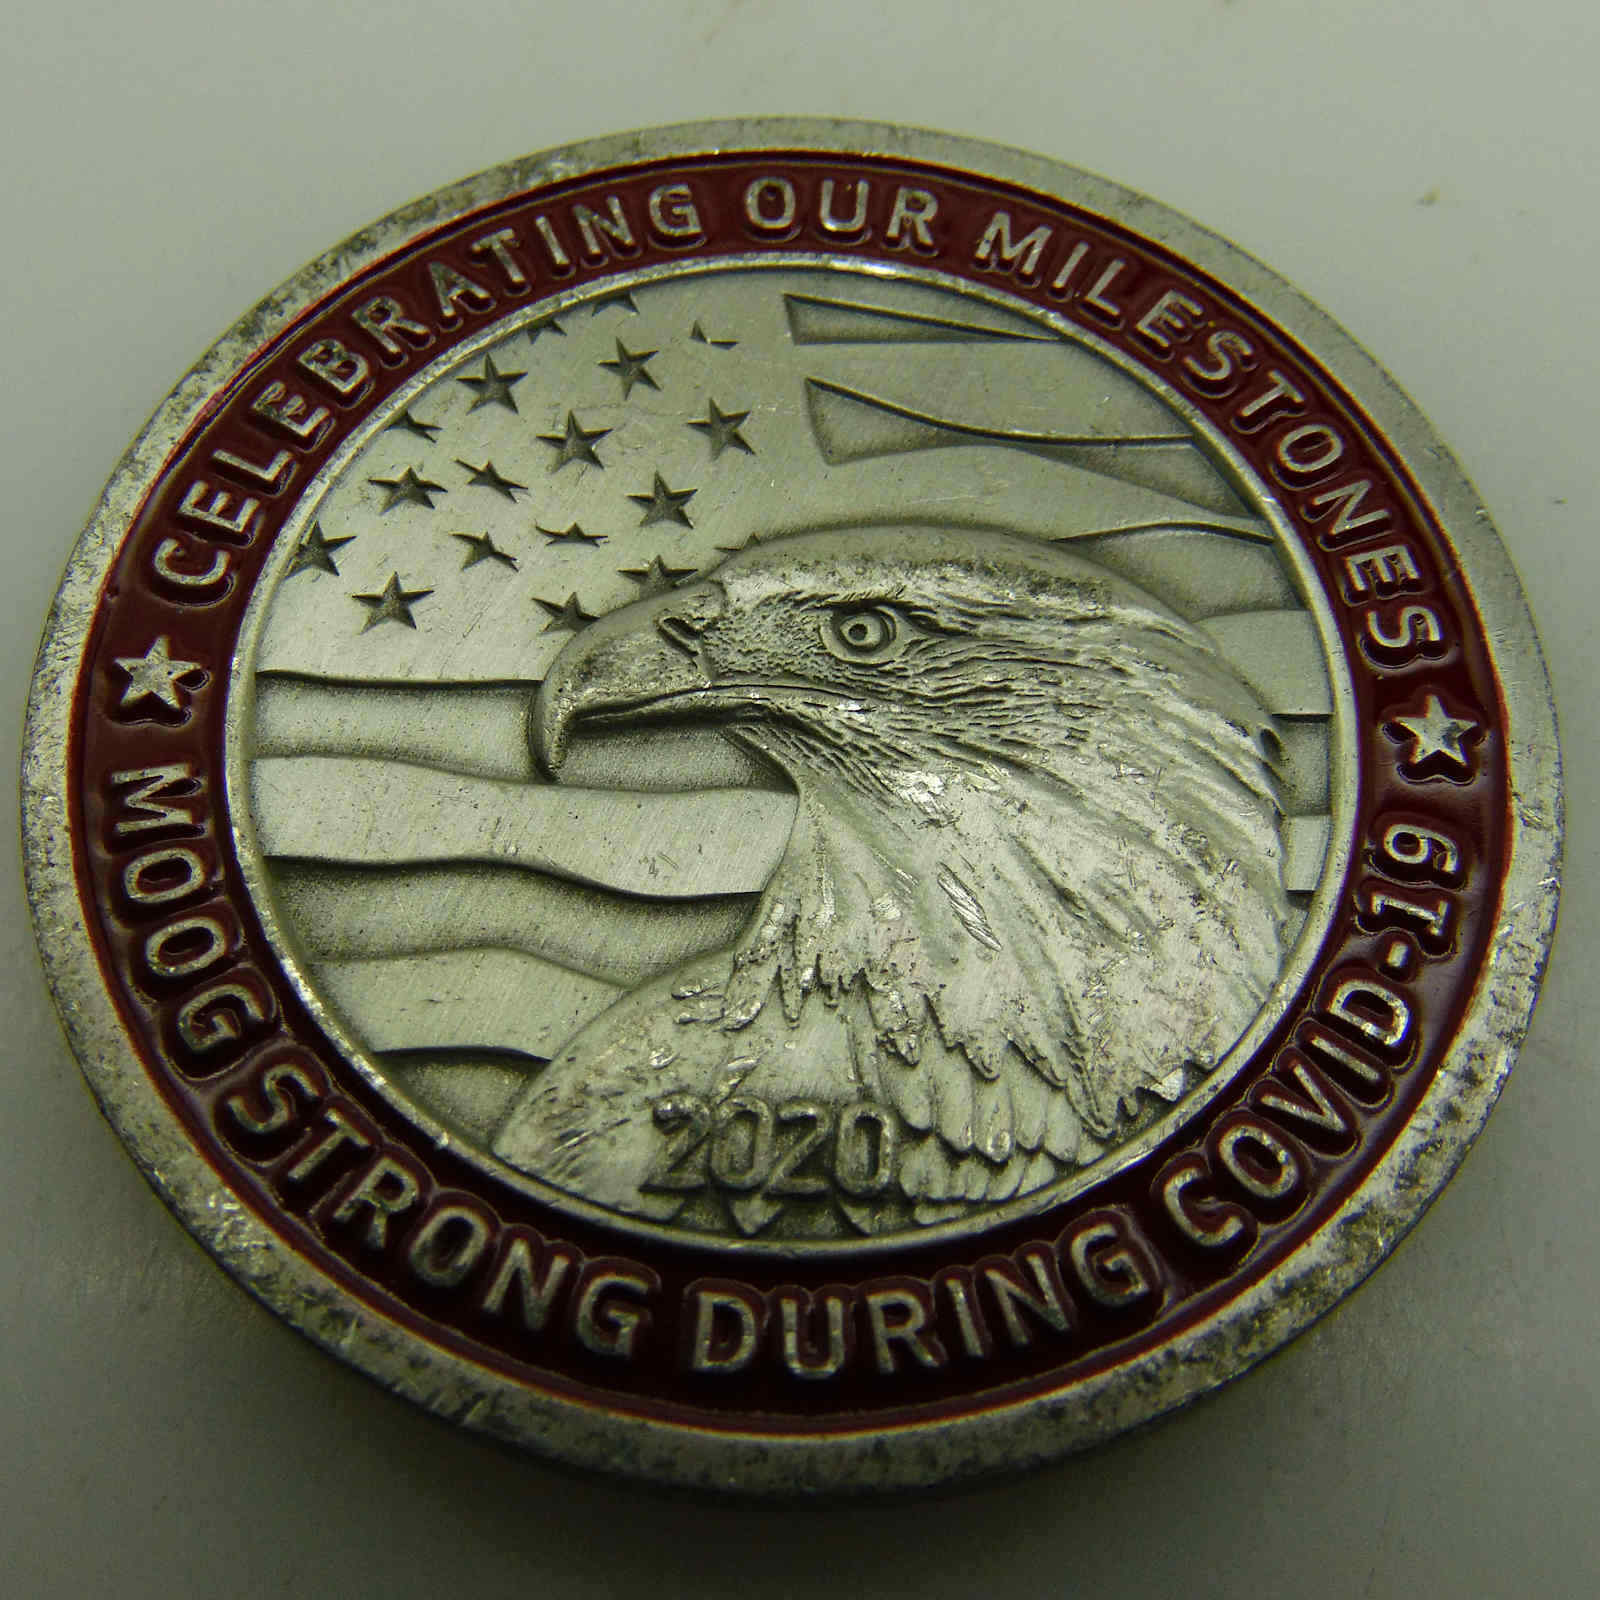 WHEN PERFORMANCE REALLY MATTERS CHALLENGE COIN